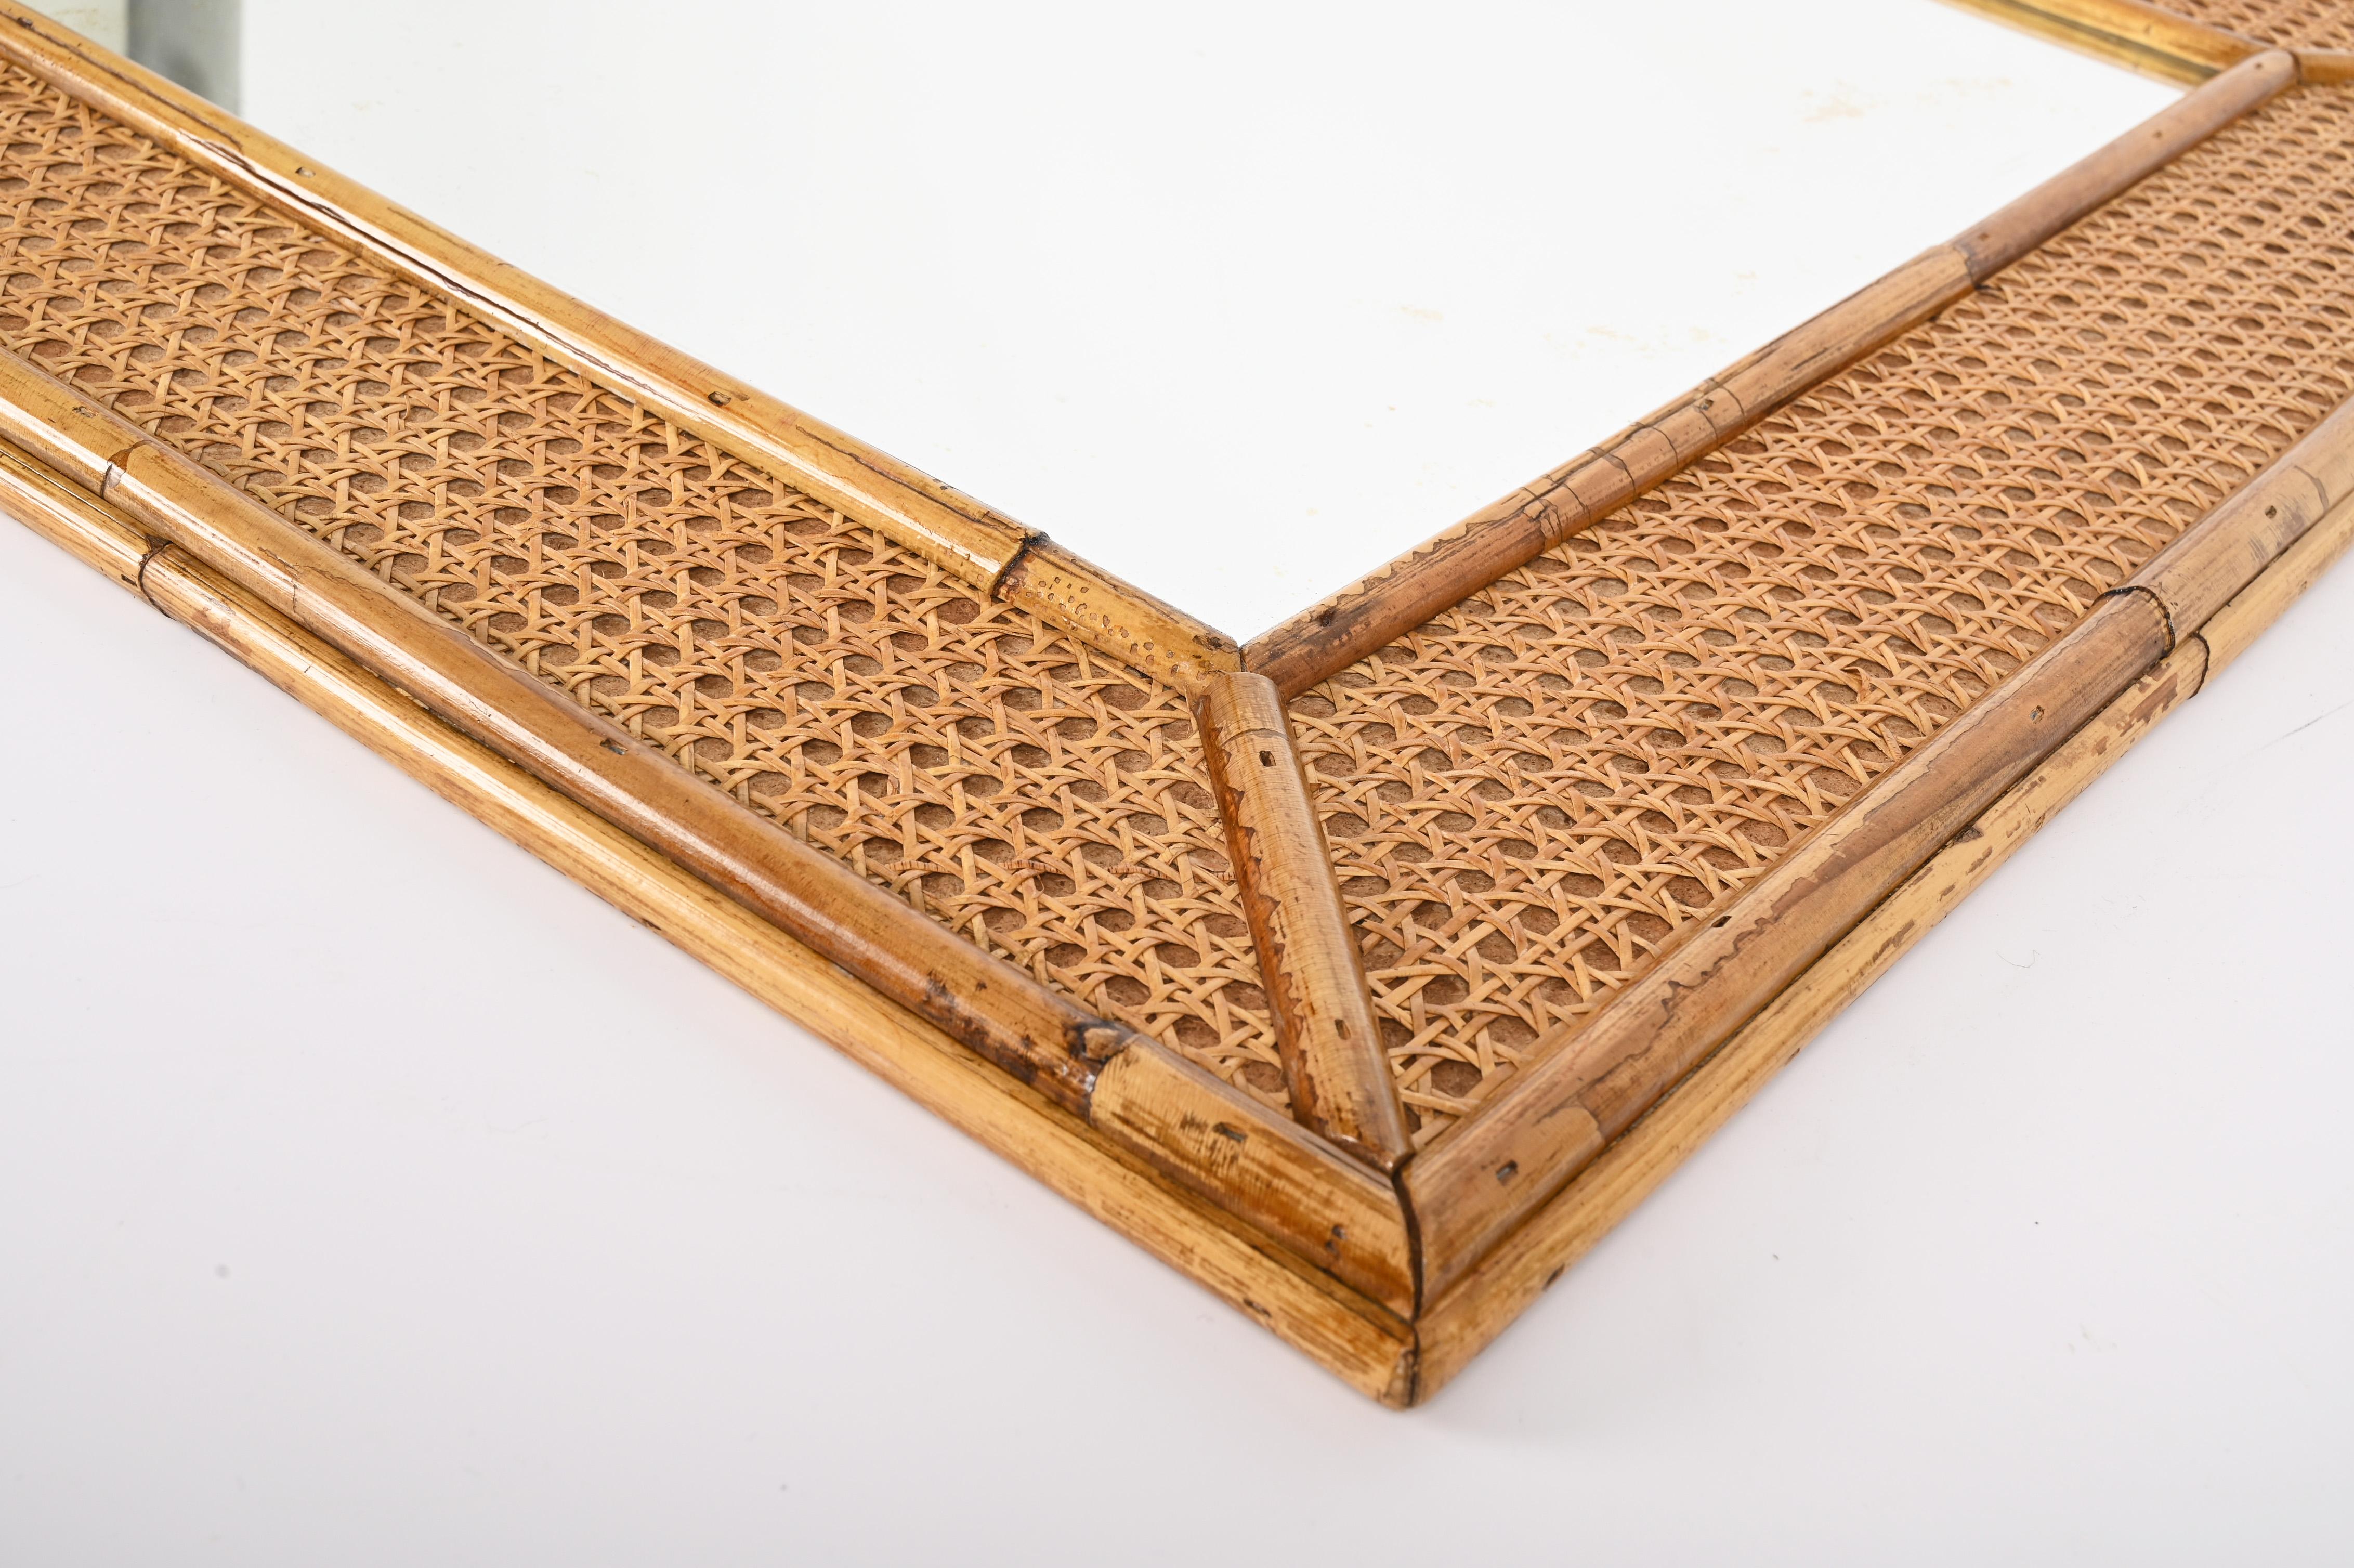 Midcentury Rectangular Italian Mirror with Bamboo and Vienna Straw Frame, 1970s For Sale 14